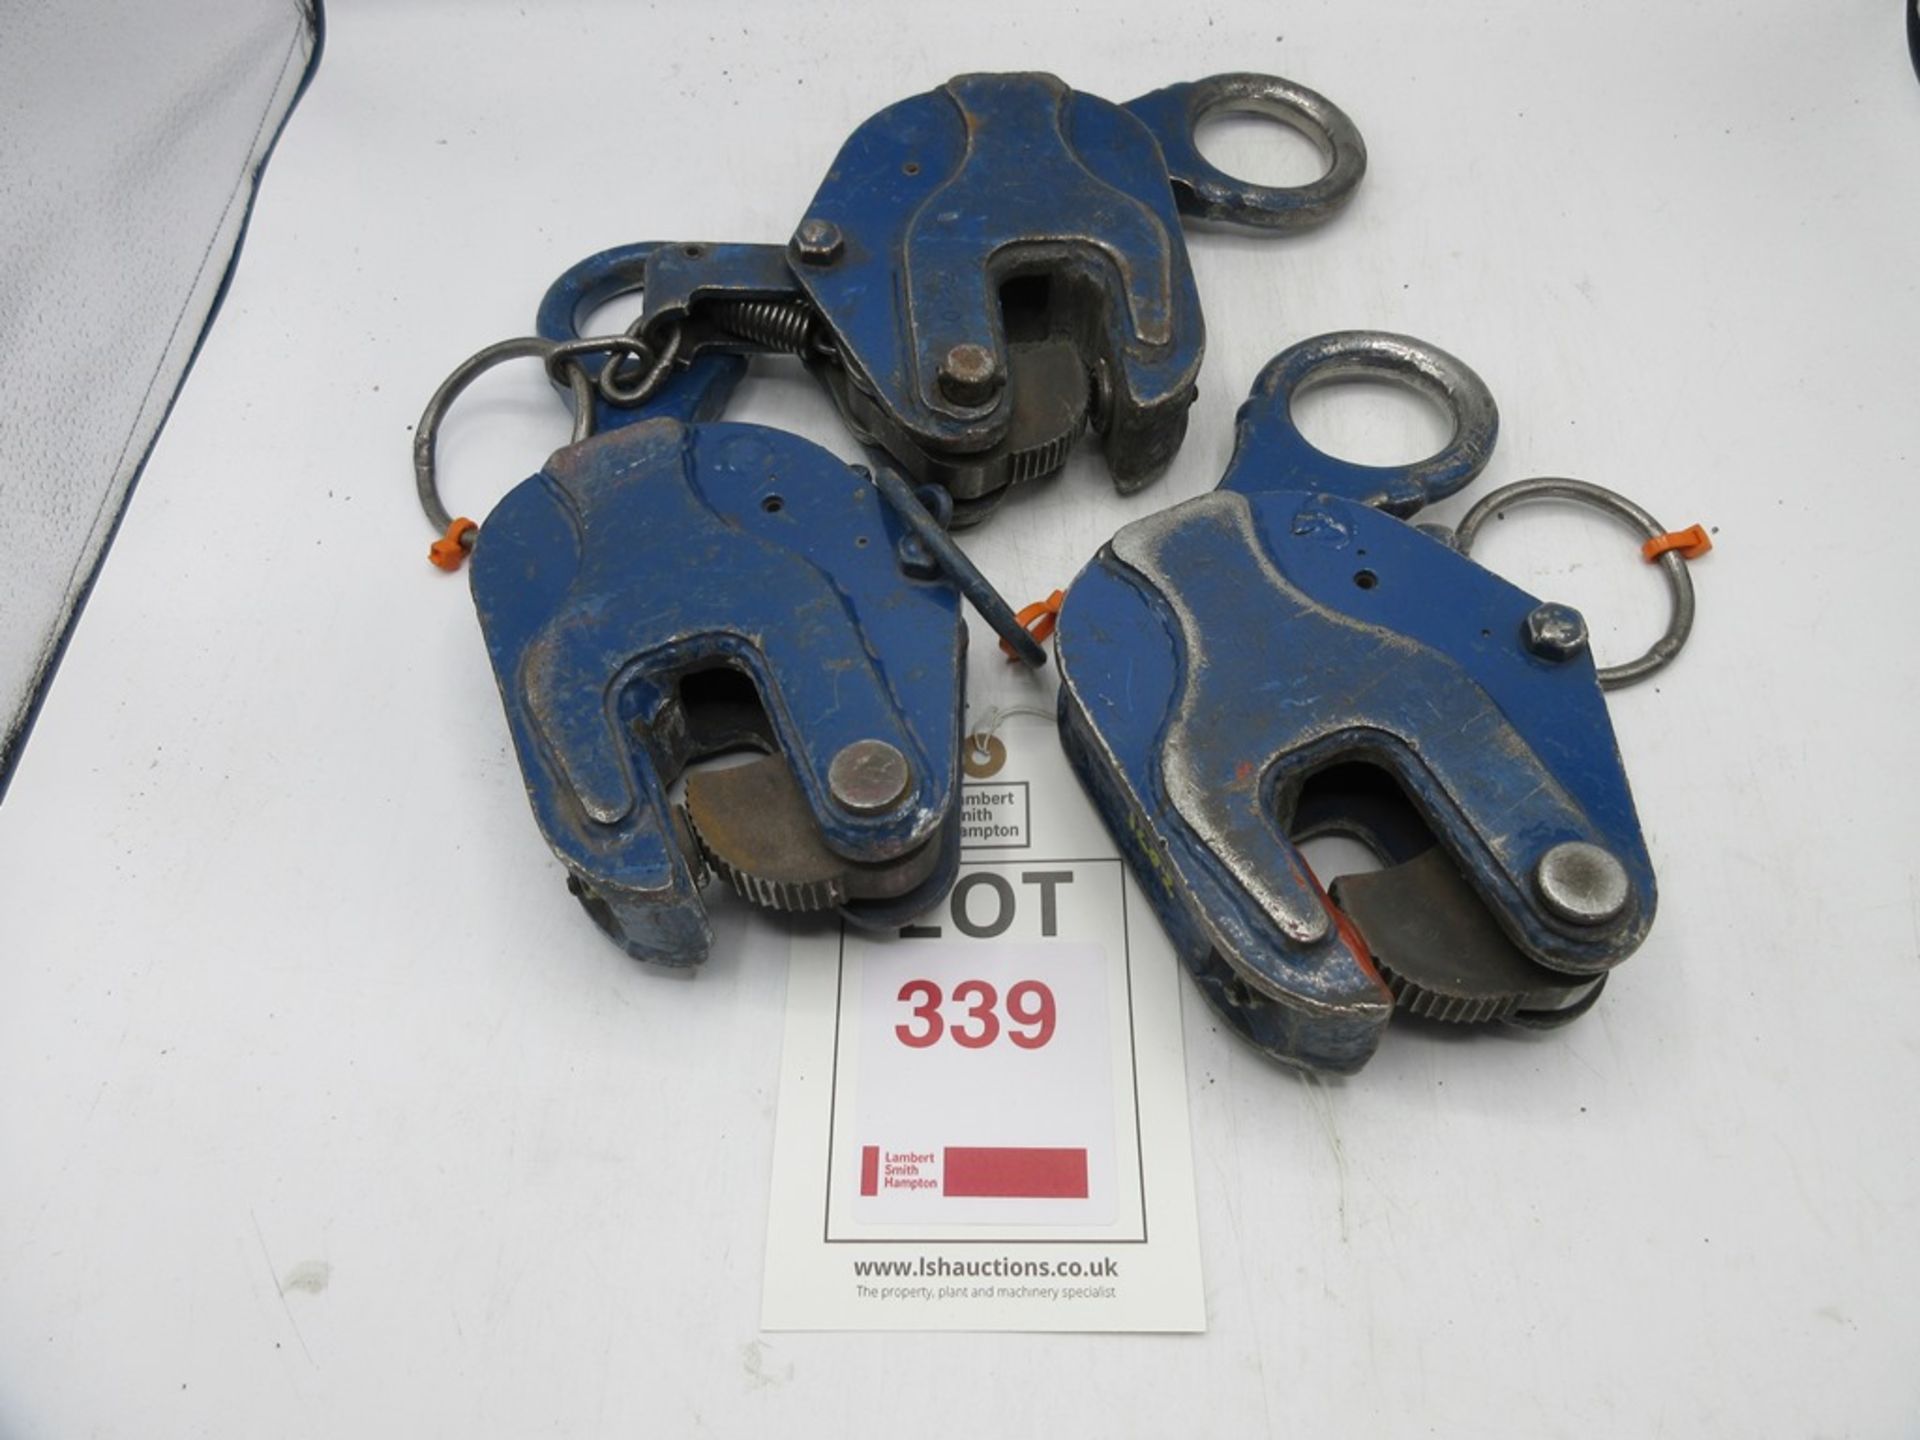 Three Plate lifting clamps